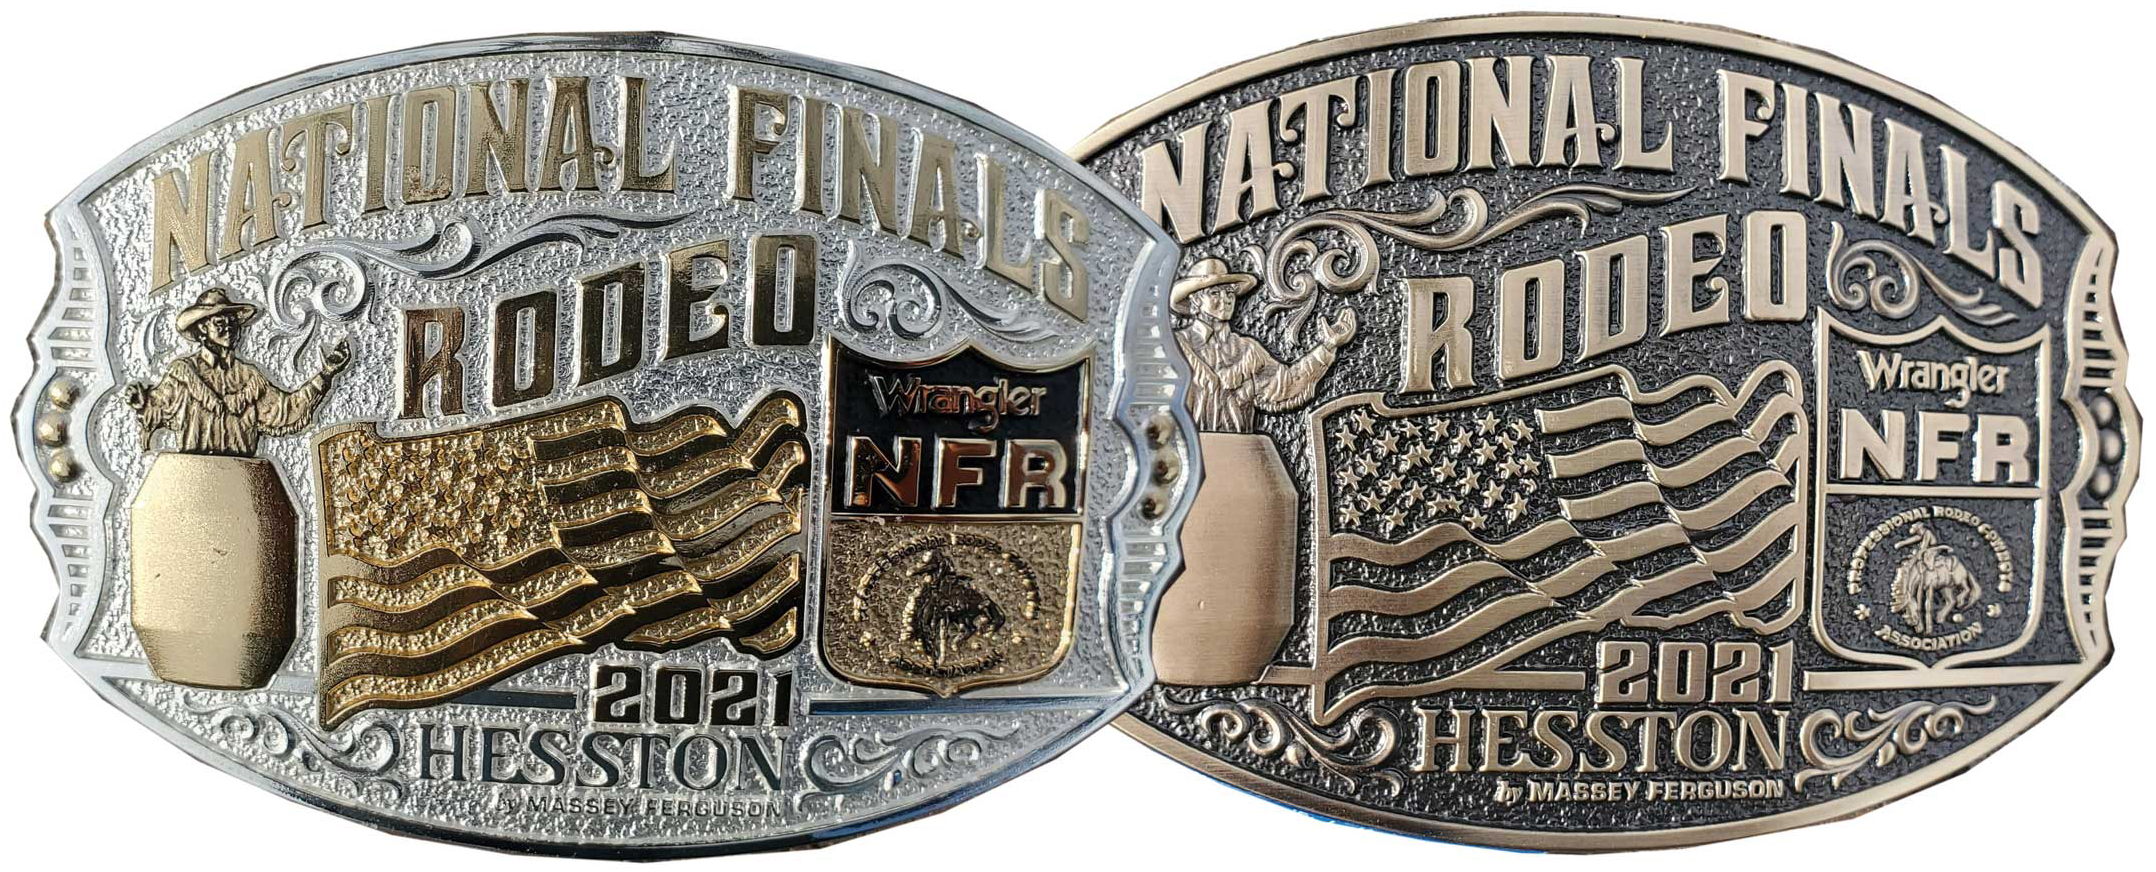 Small National Finals Rodeo Hesston 2014 NFR Youth Cowboy Buckle New Wrangler 